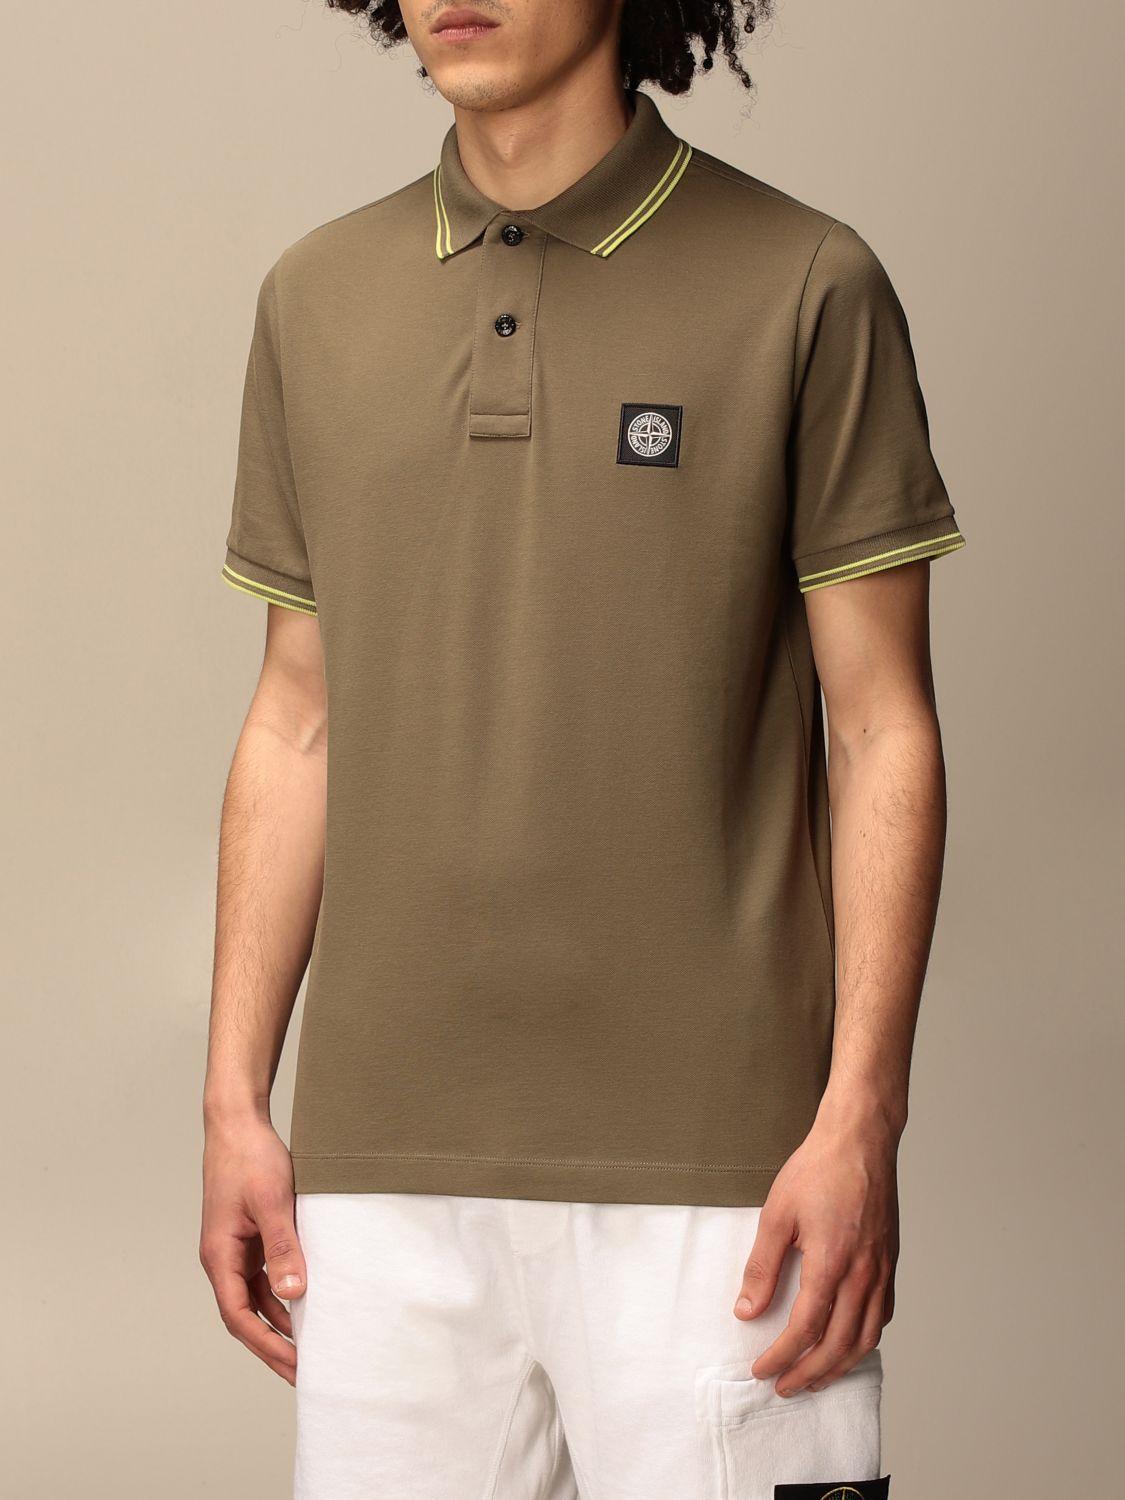 Stone Island Polo Shirt in Green (Blue) for Men - Lyst